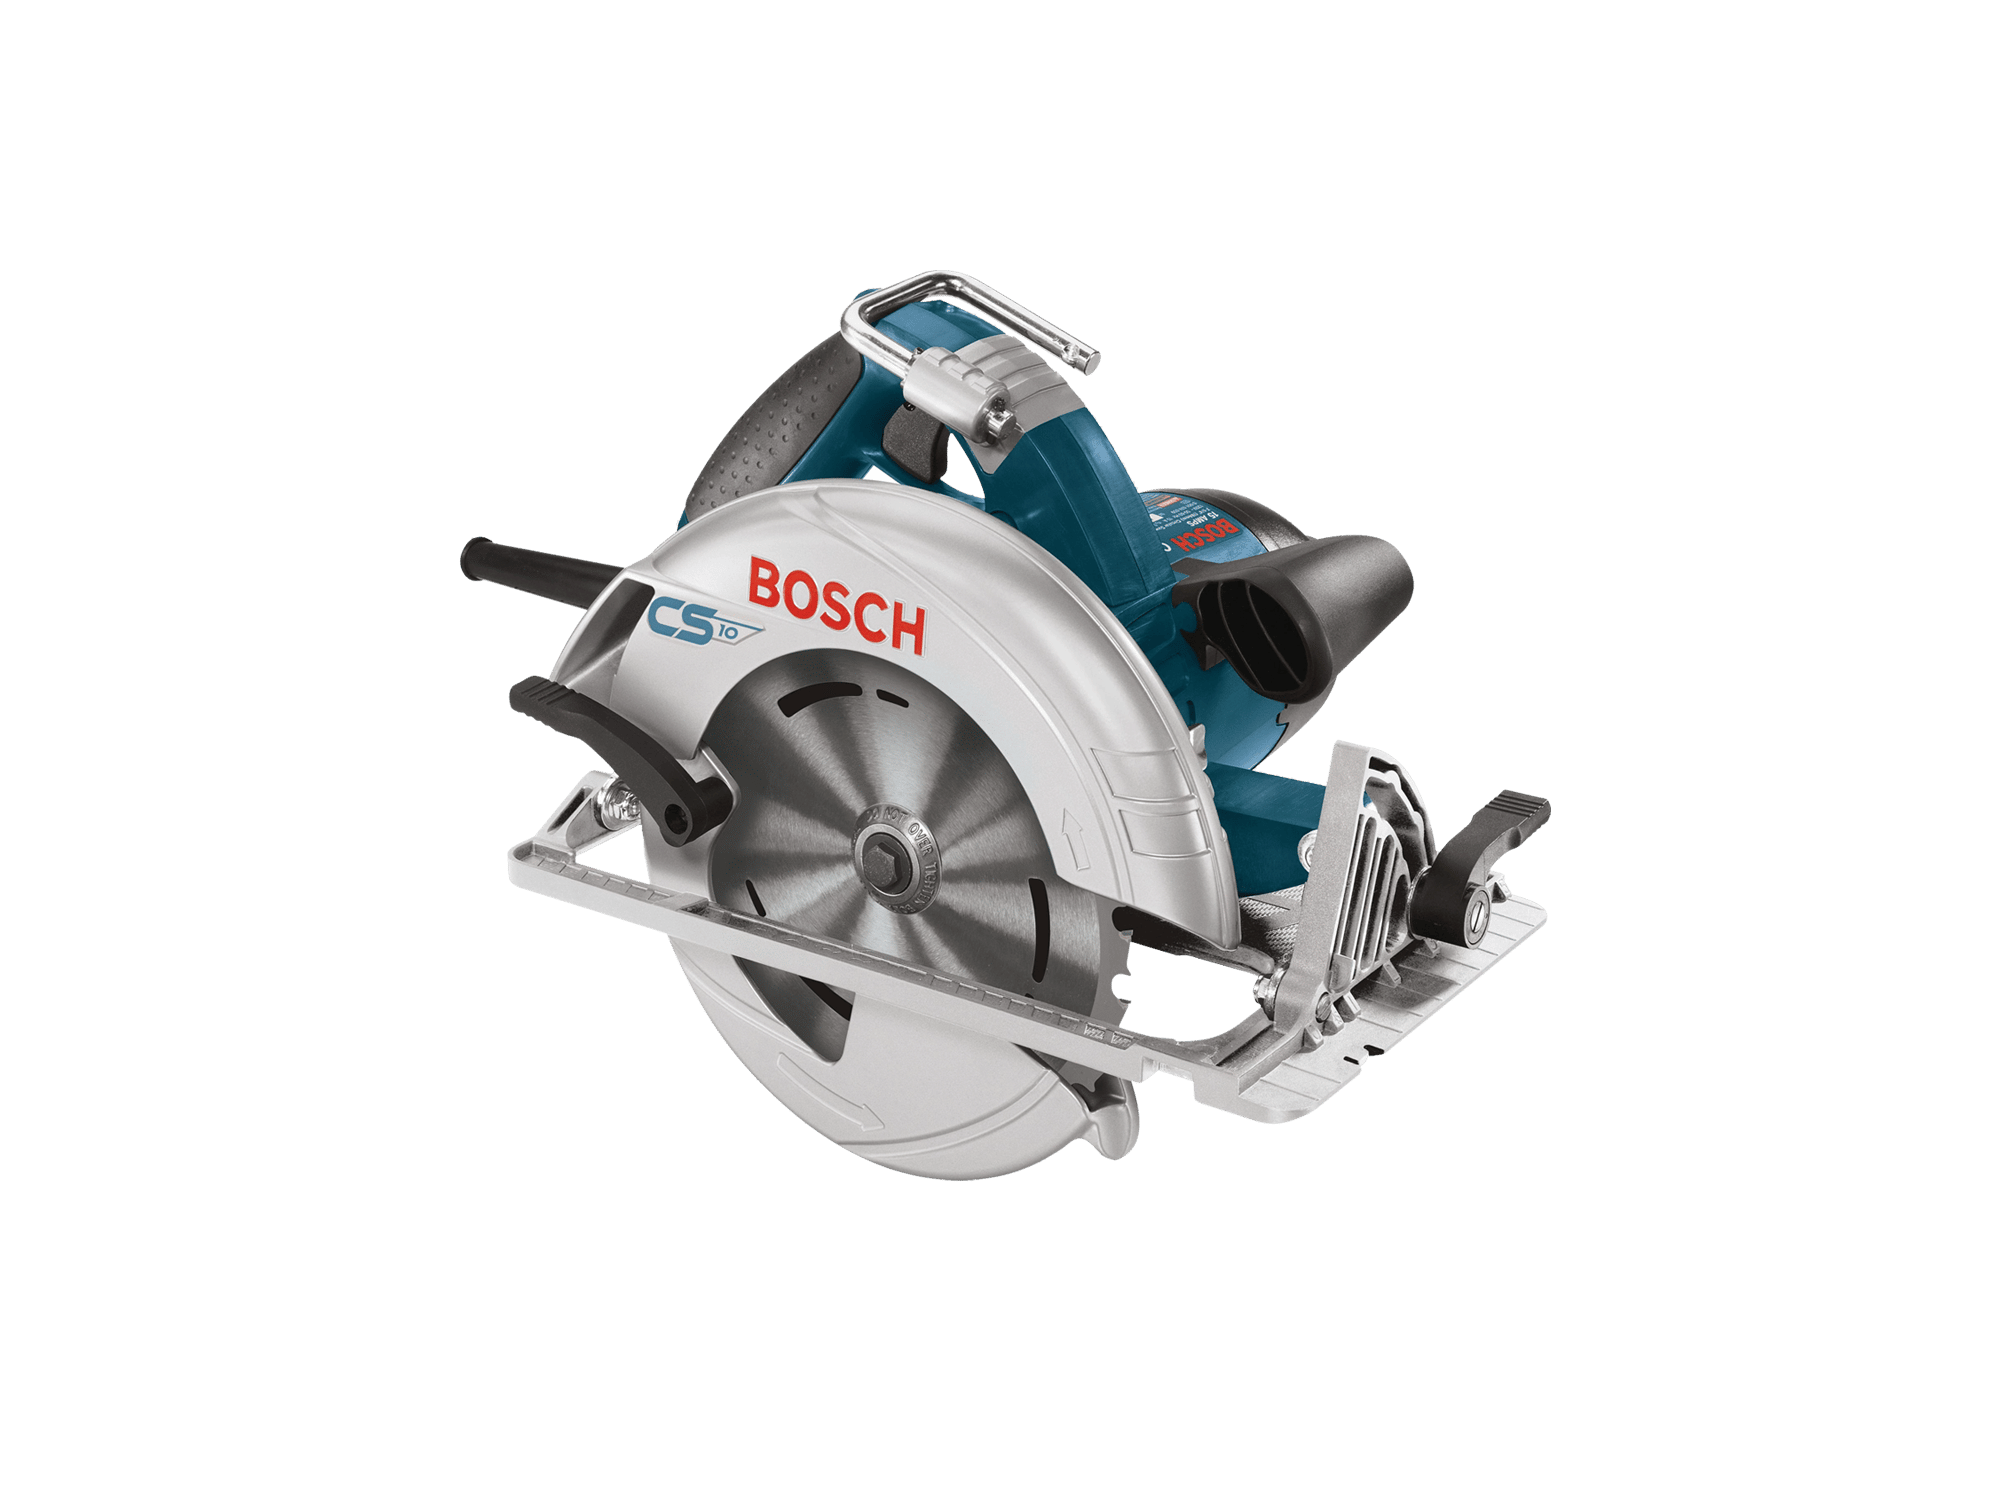 Bosch saw with changes highlighted